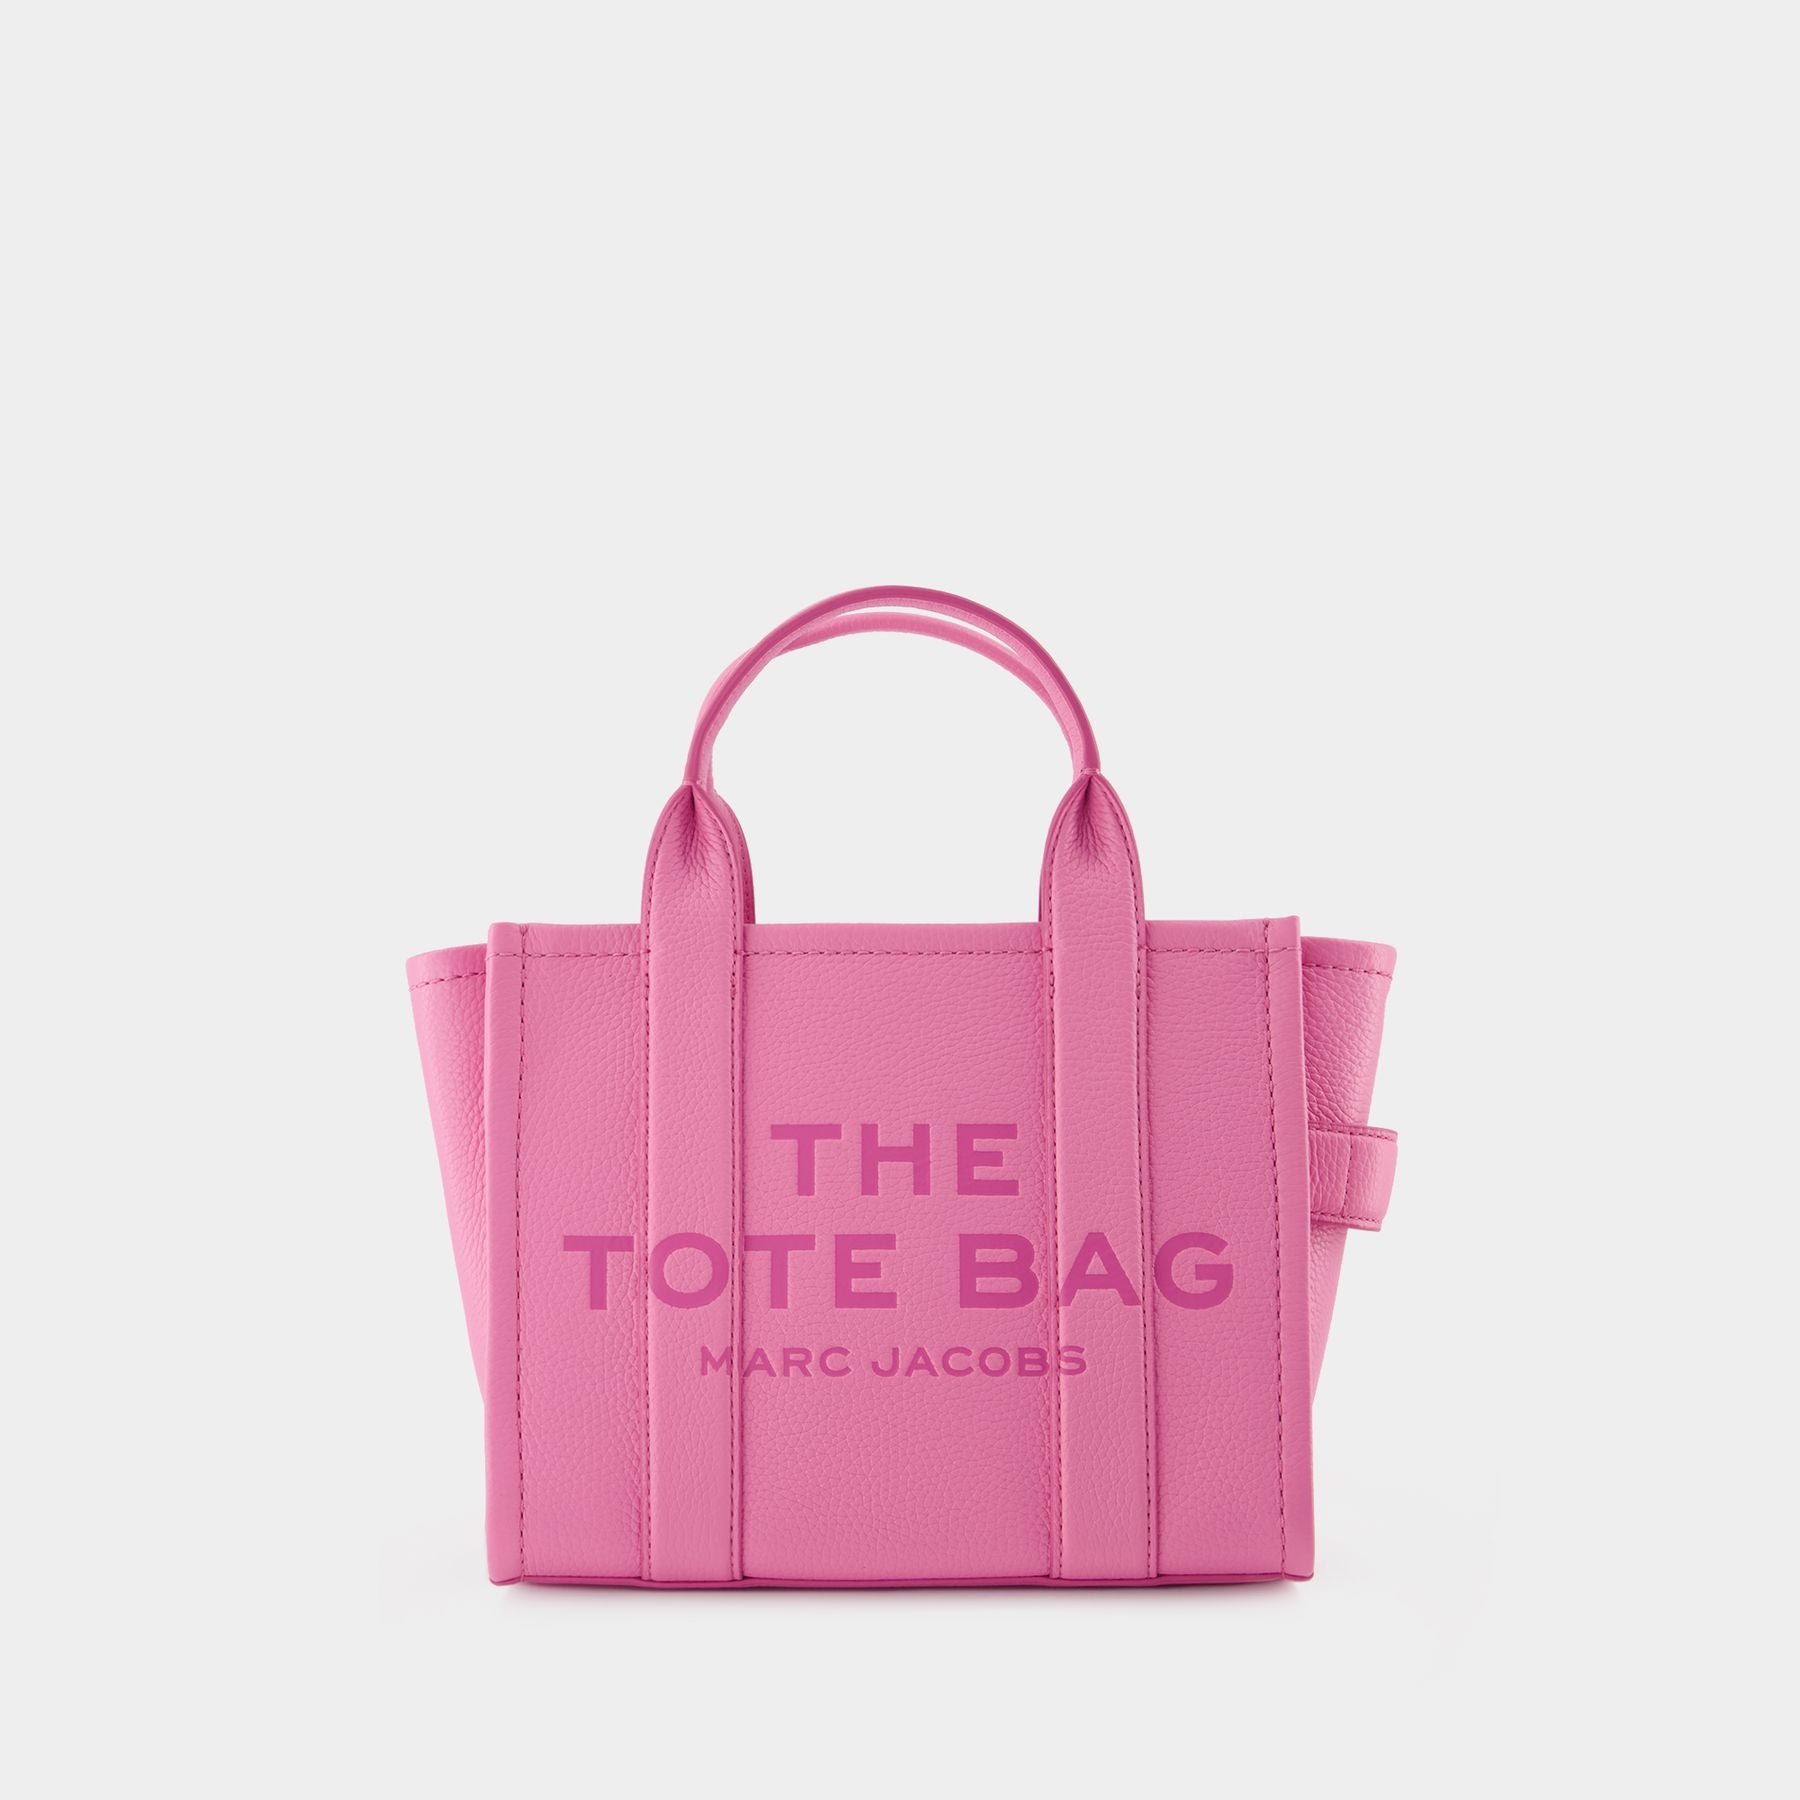 Marc Jacobs The Mini Tote Tote in Rose-Pink Leather